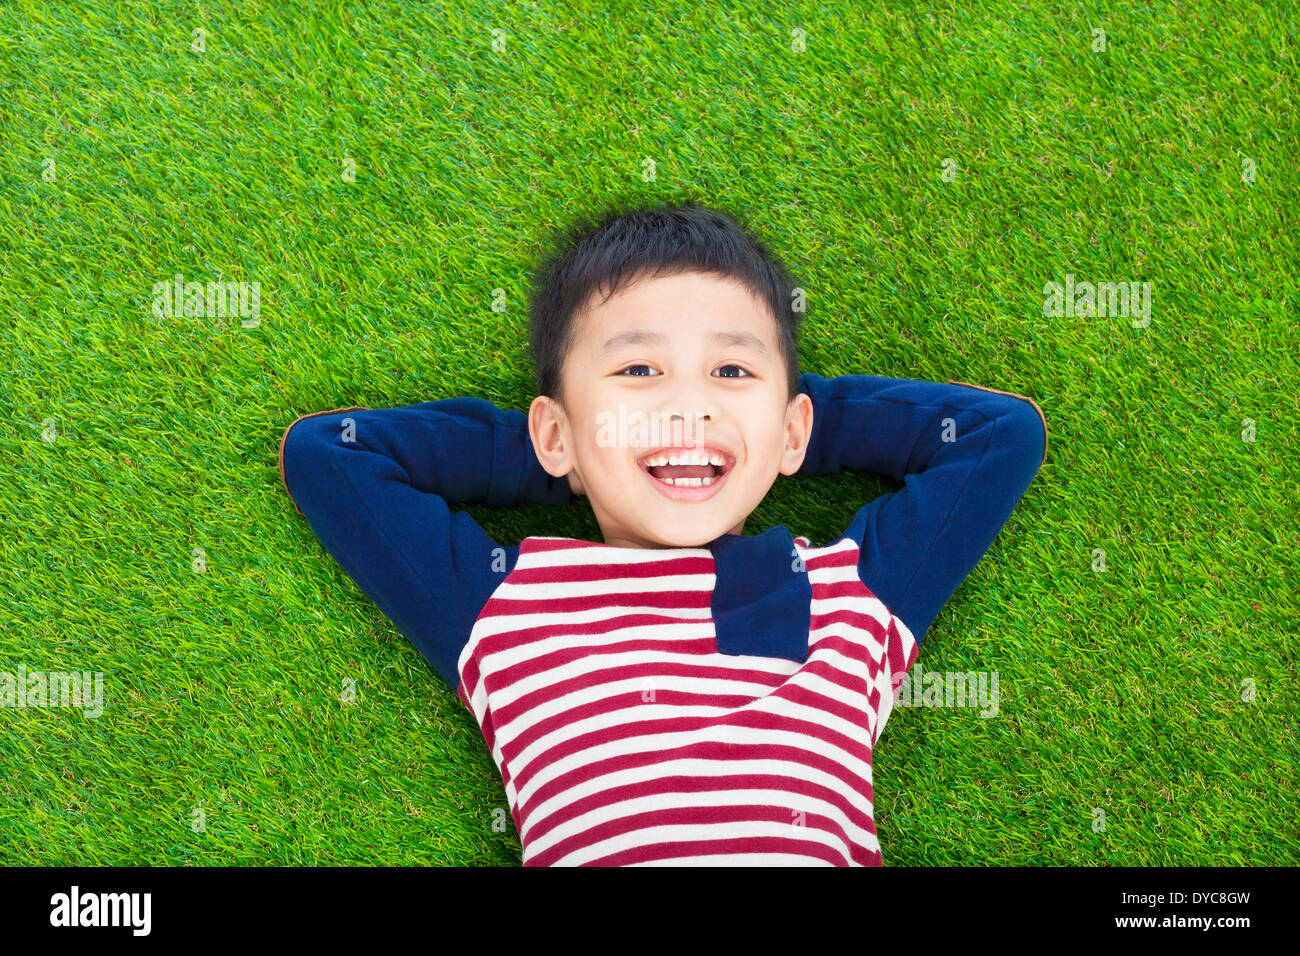 smiling kid lying and holding his head Stock Photo